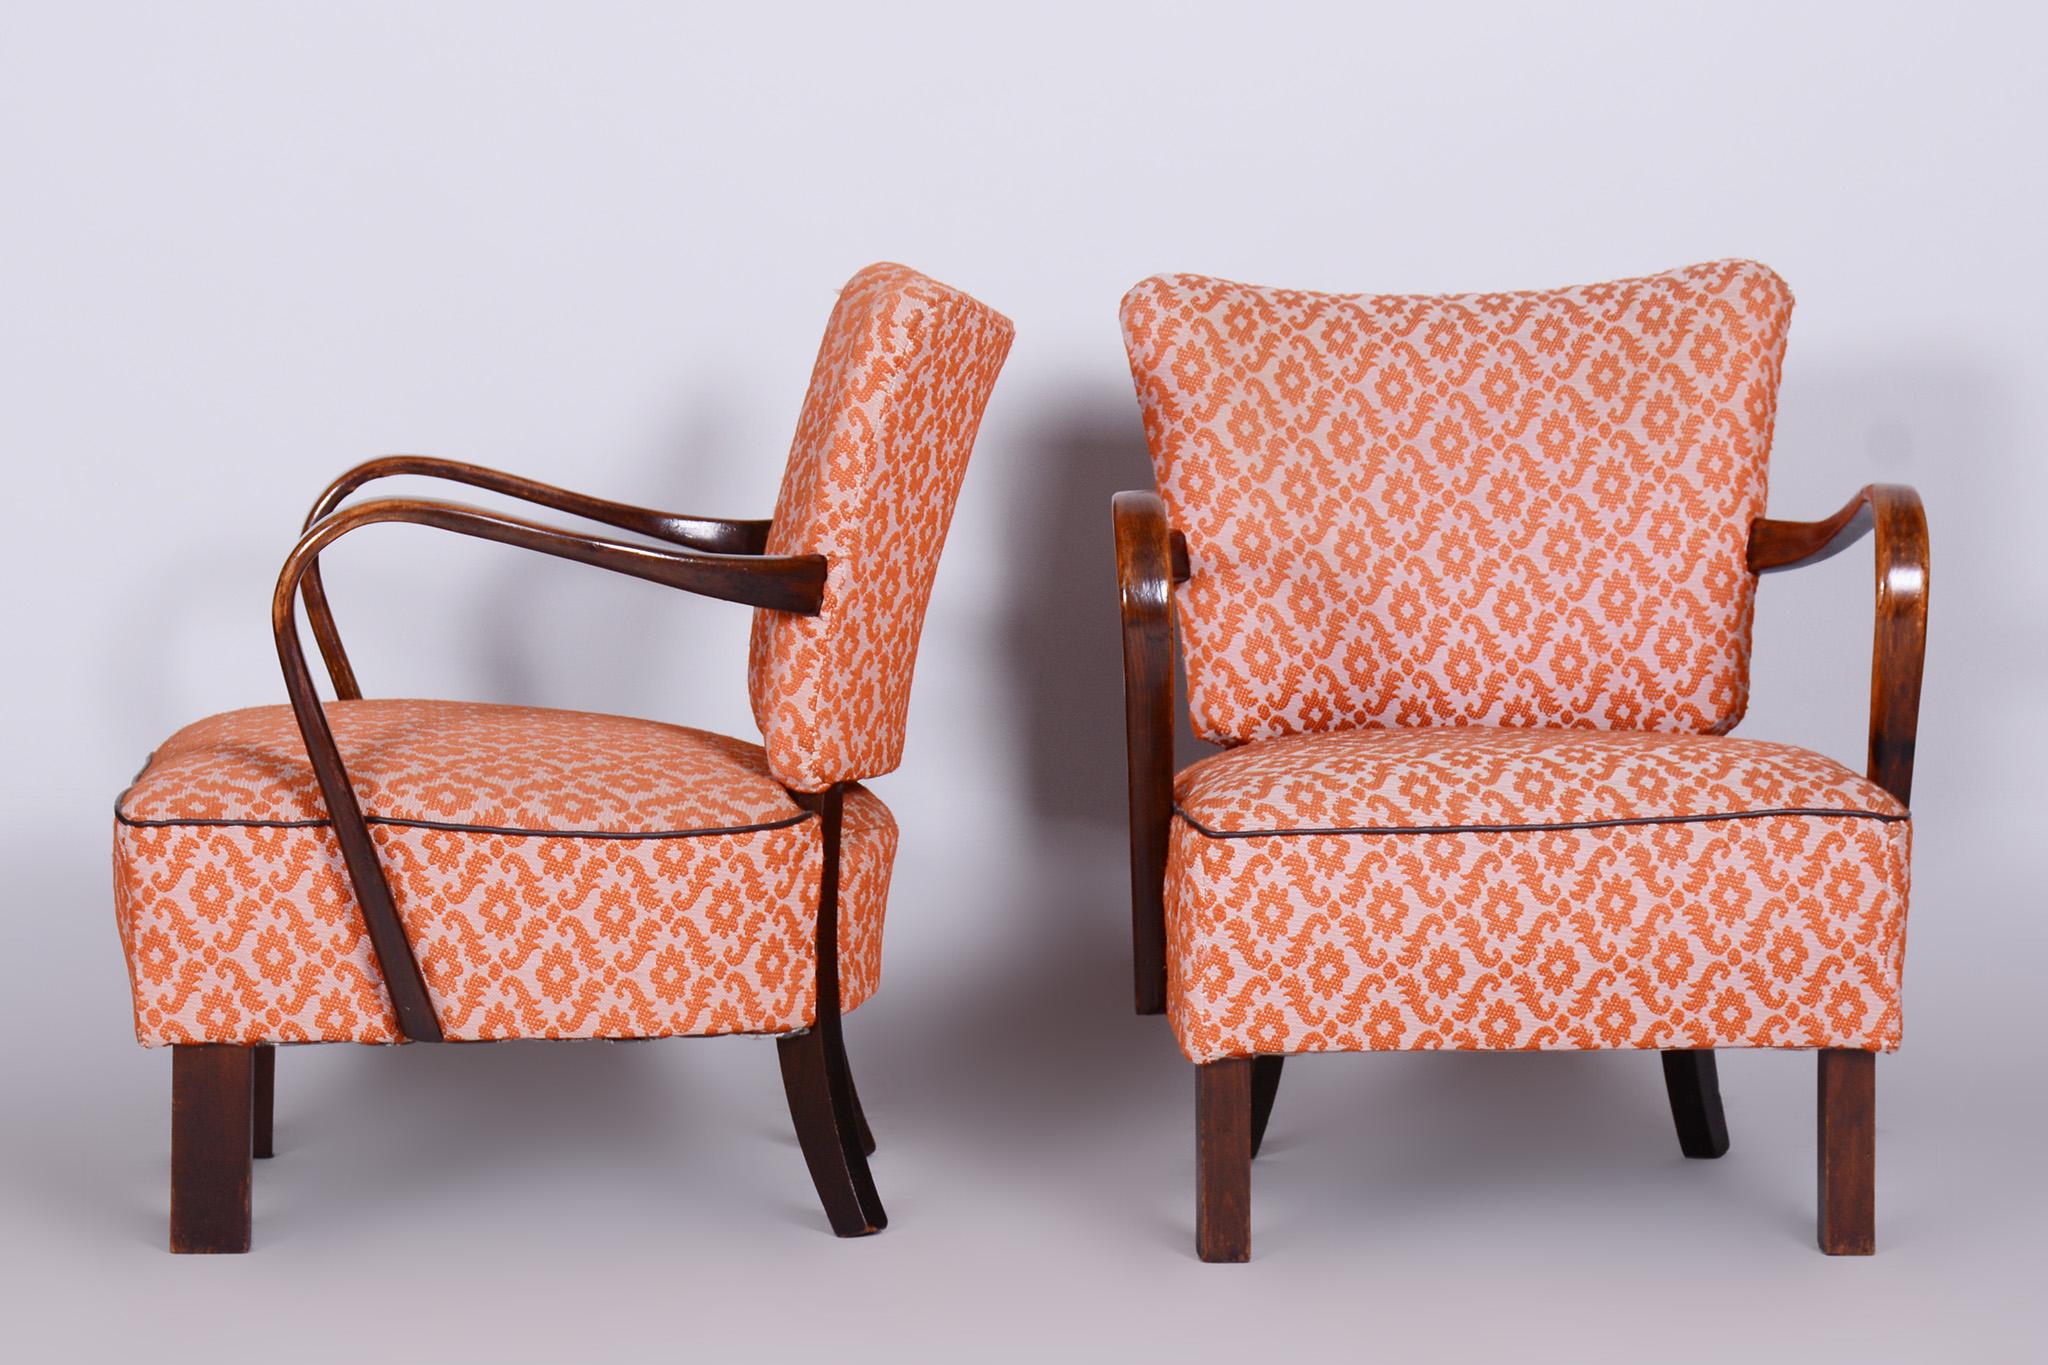 20th Century Pair of Beech Art Deco Armchairs Made in 1930s, Czechia, Revived Polish For Sale